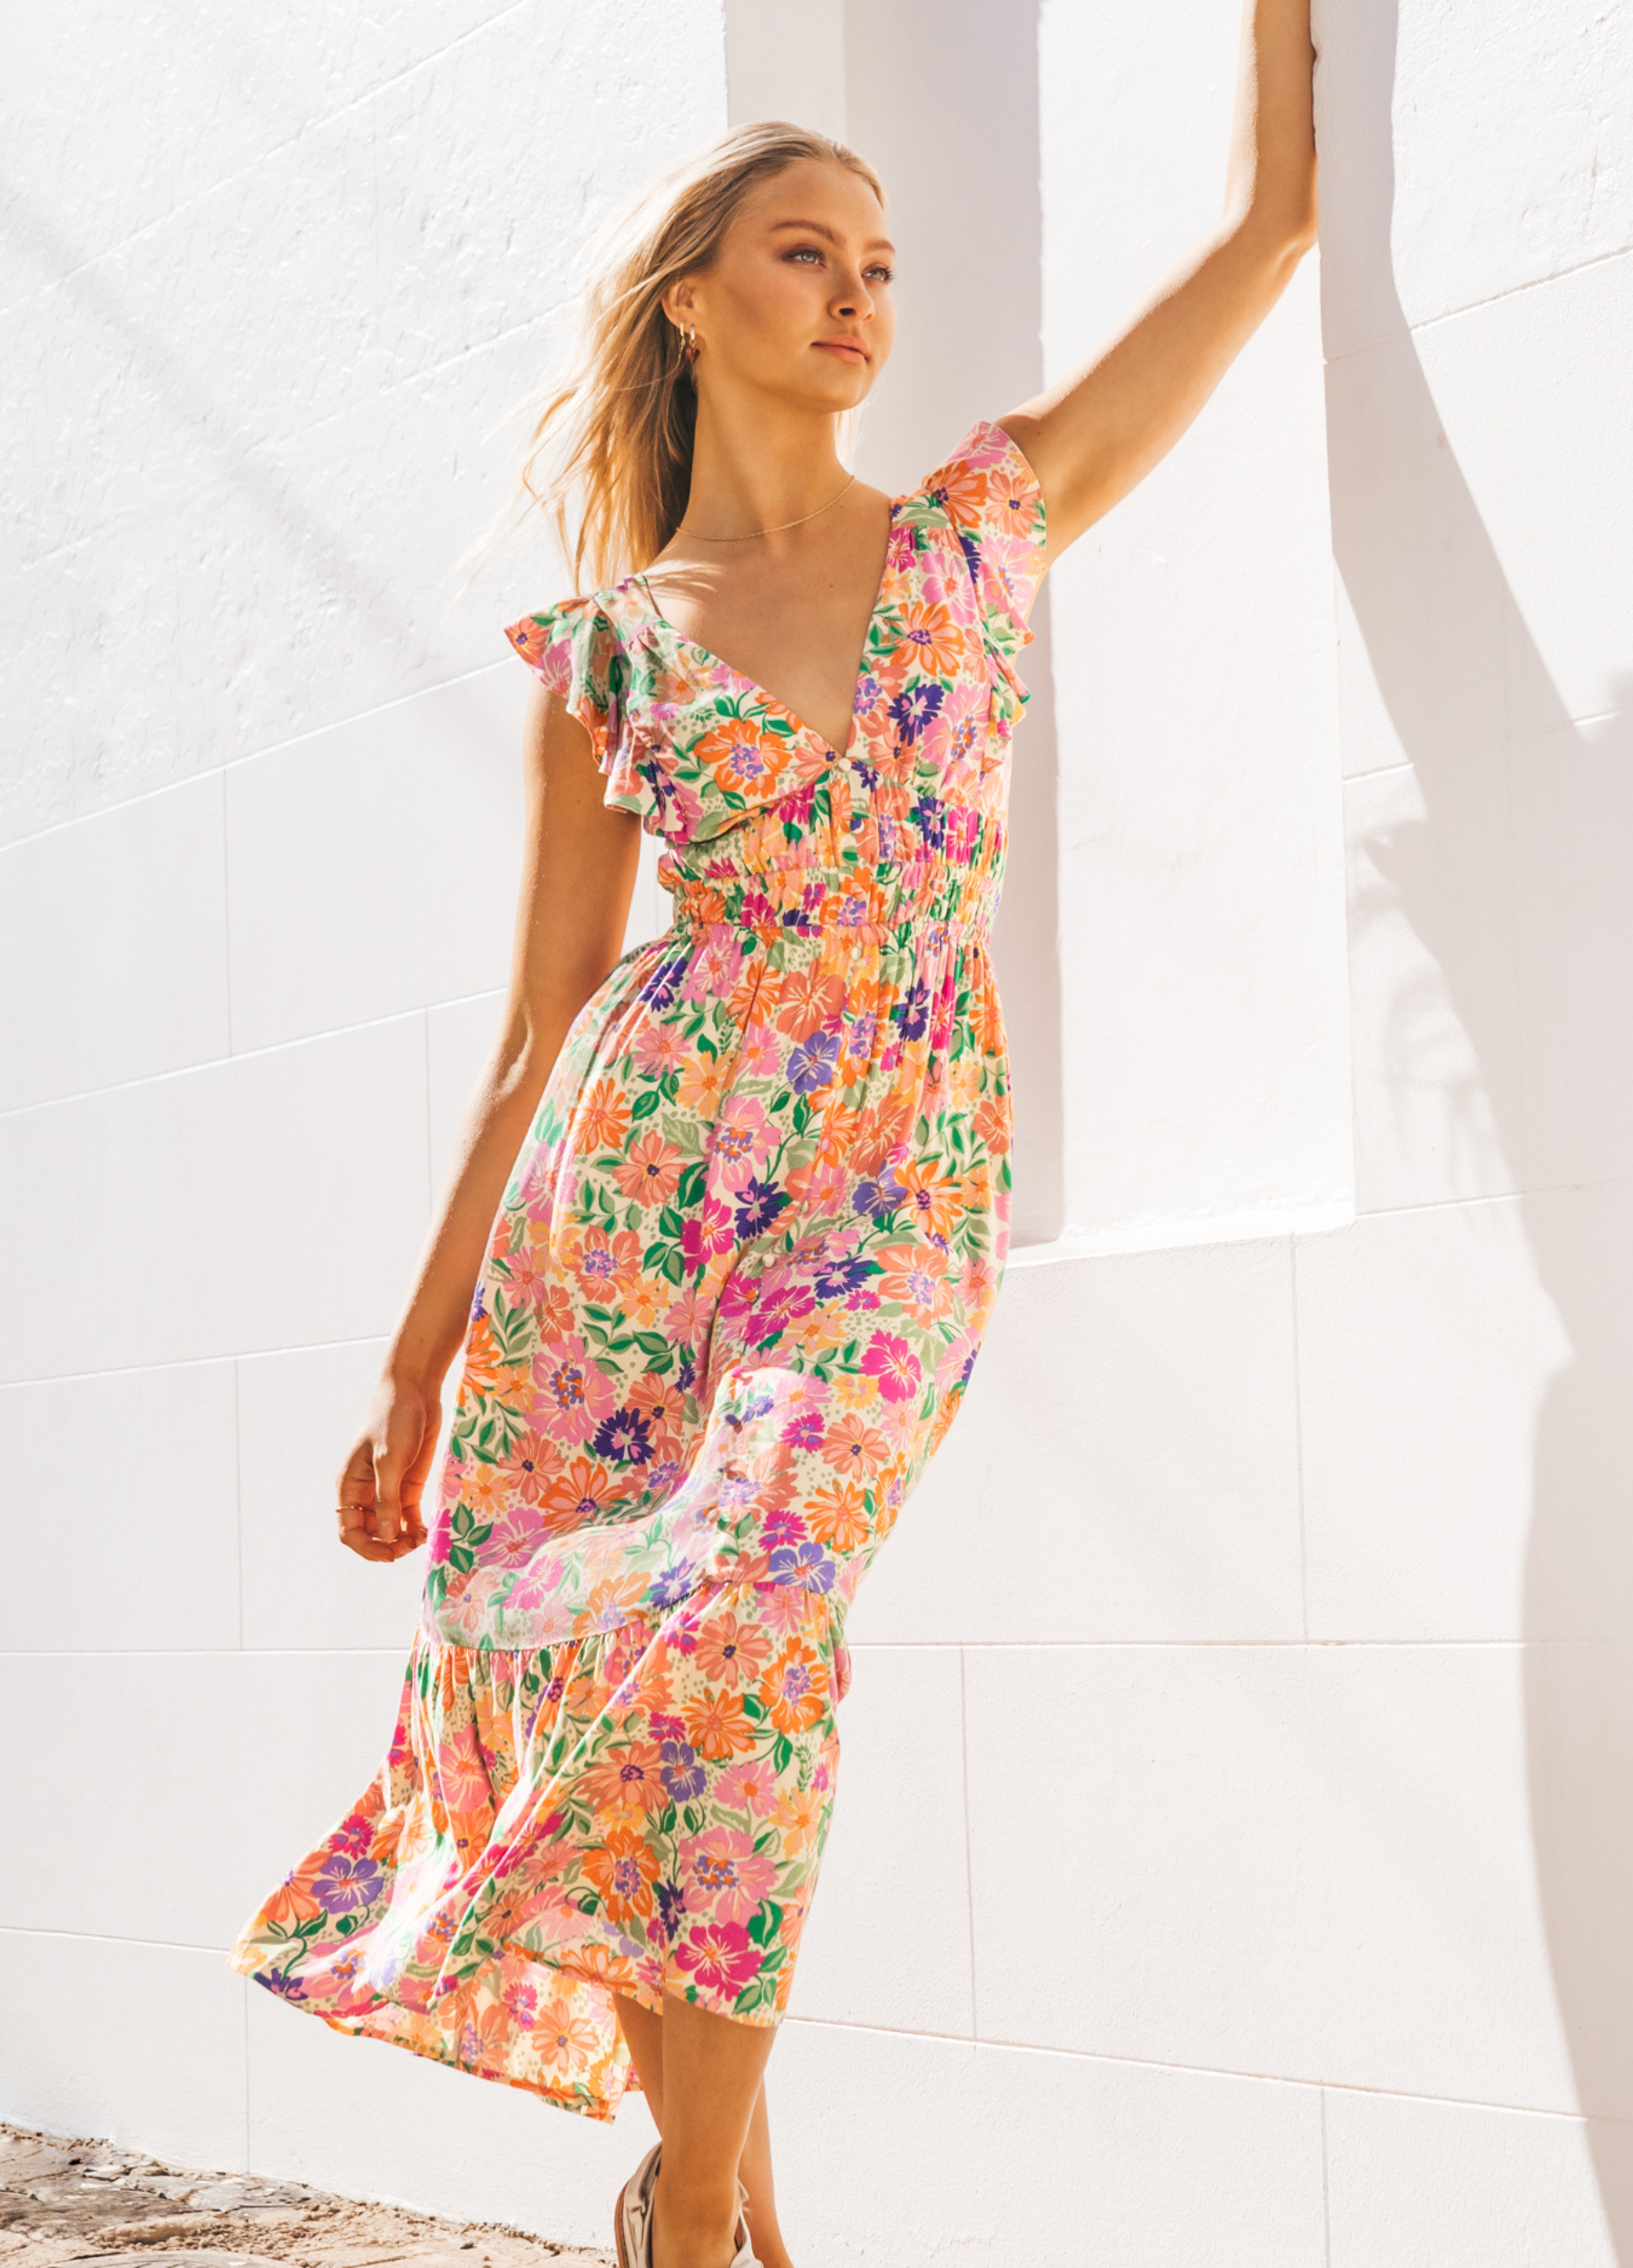 Model wearing bright floral colour dress with cut out at the back and buttons at the front